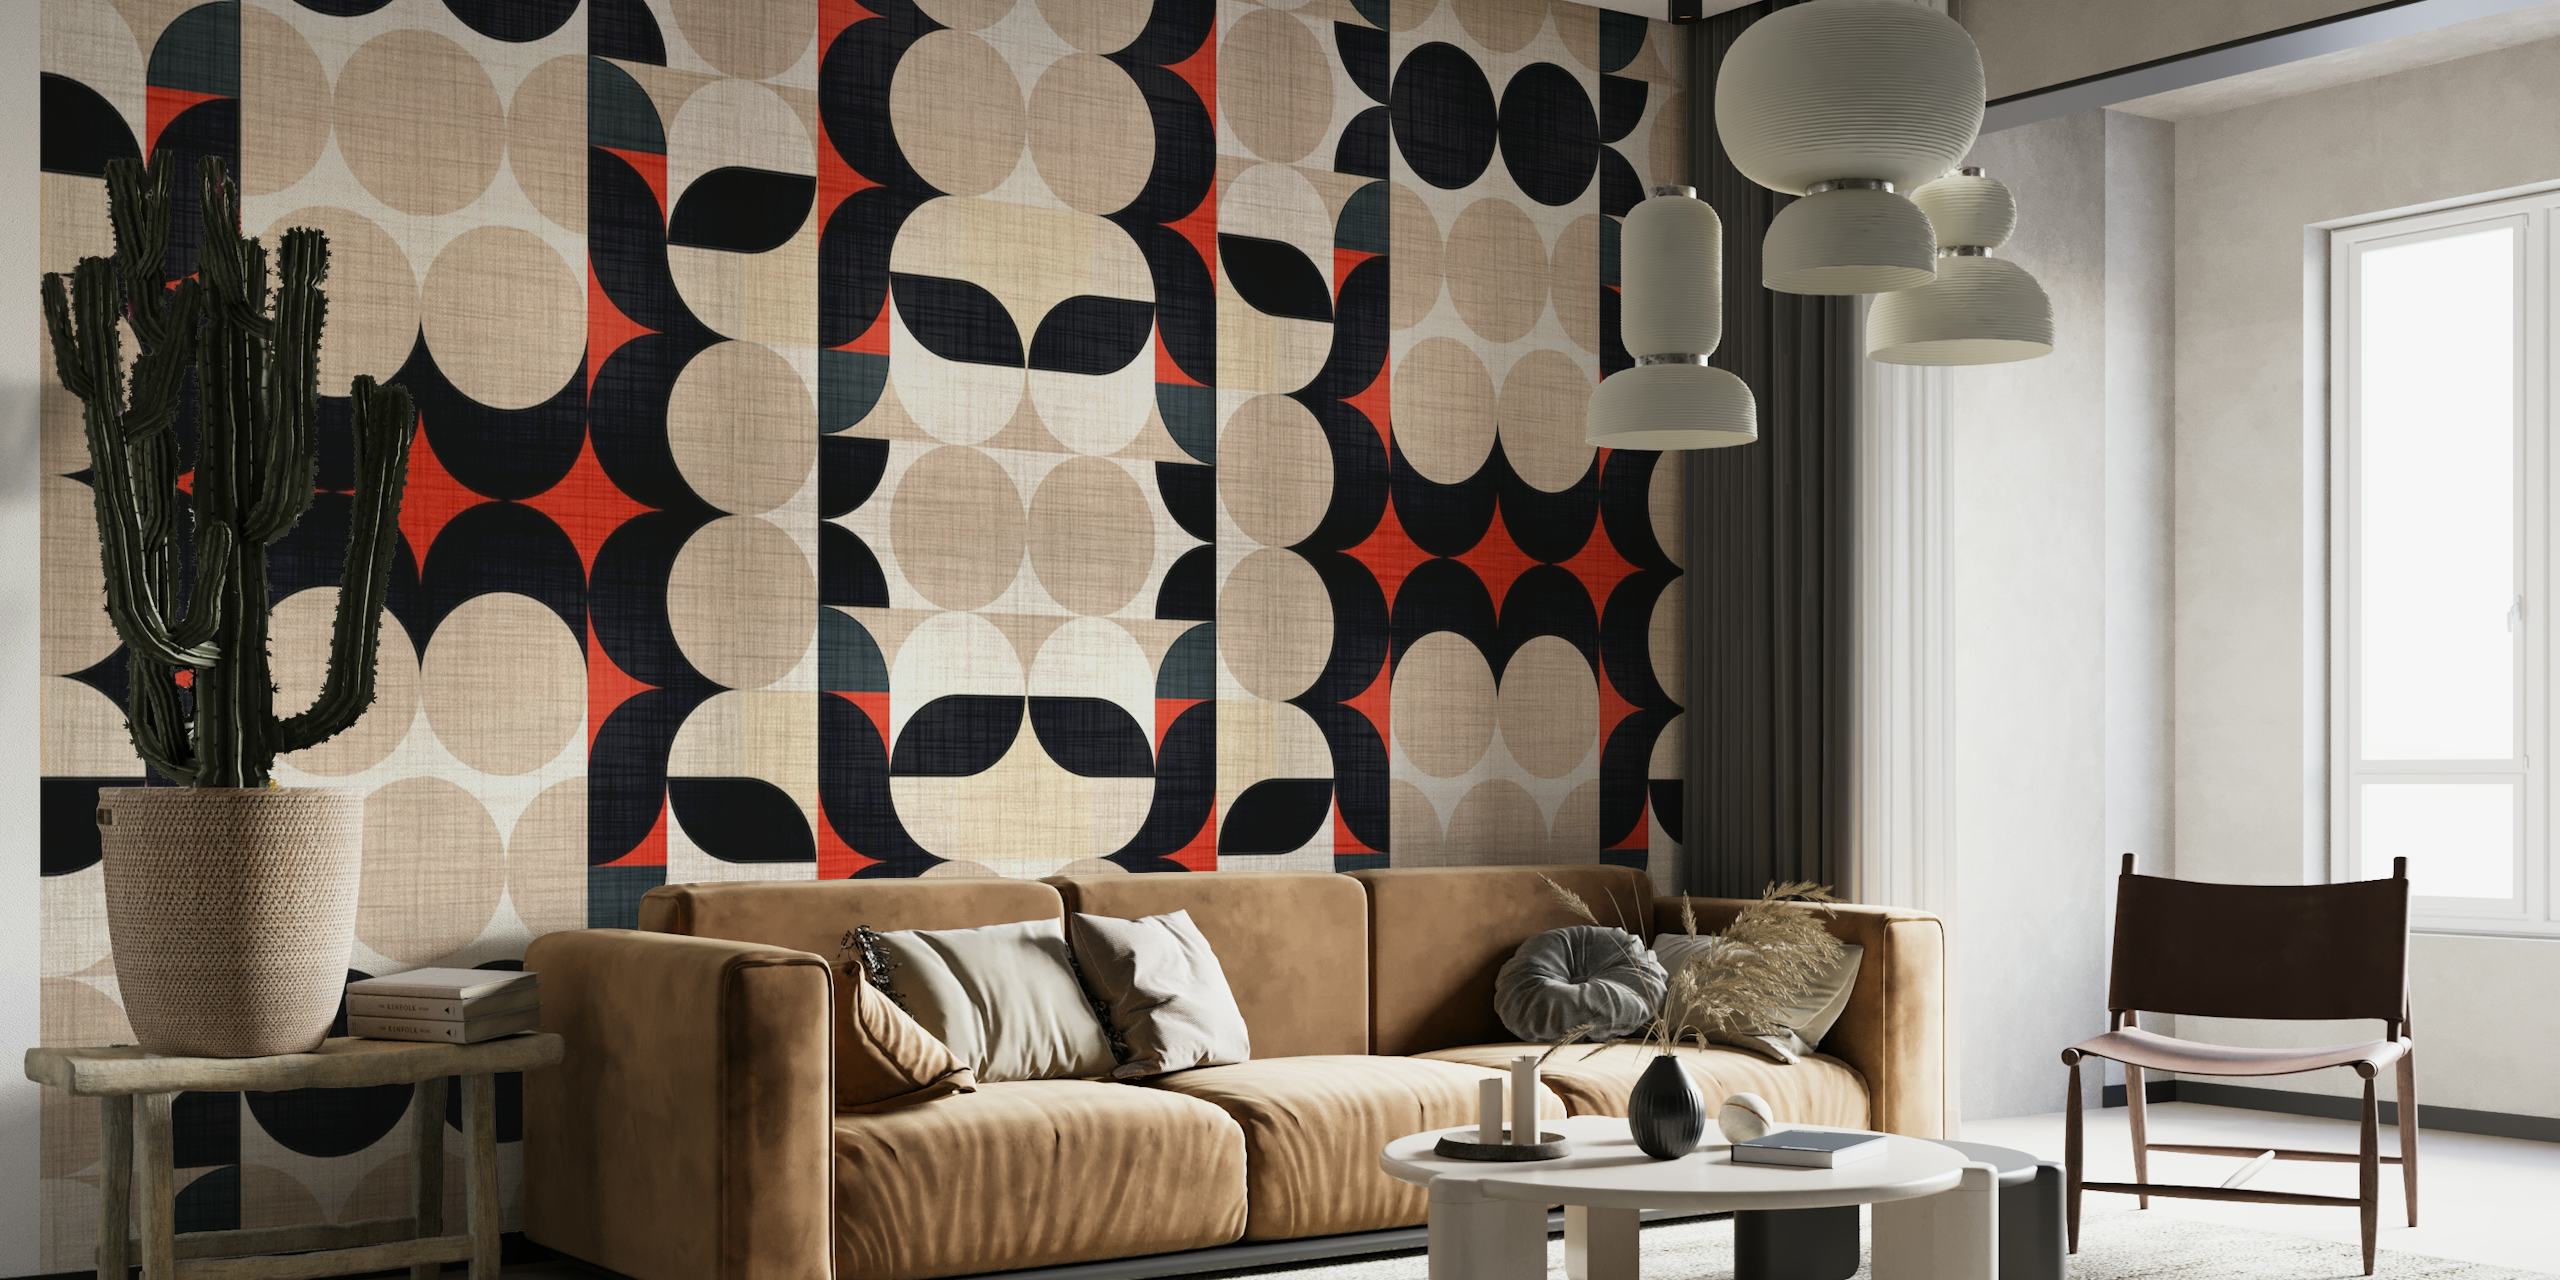 Mid-Century Modern Fabric Pattern Wall Mural featuring geometric shapes in beige, black, and red